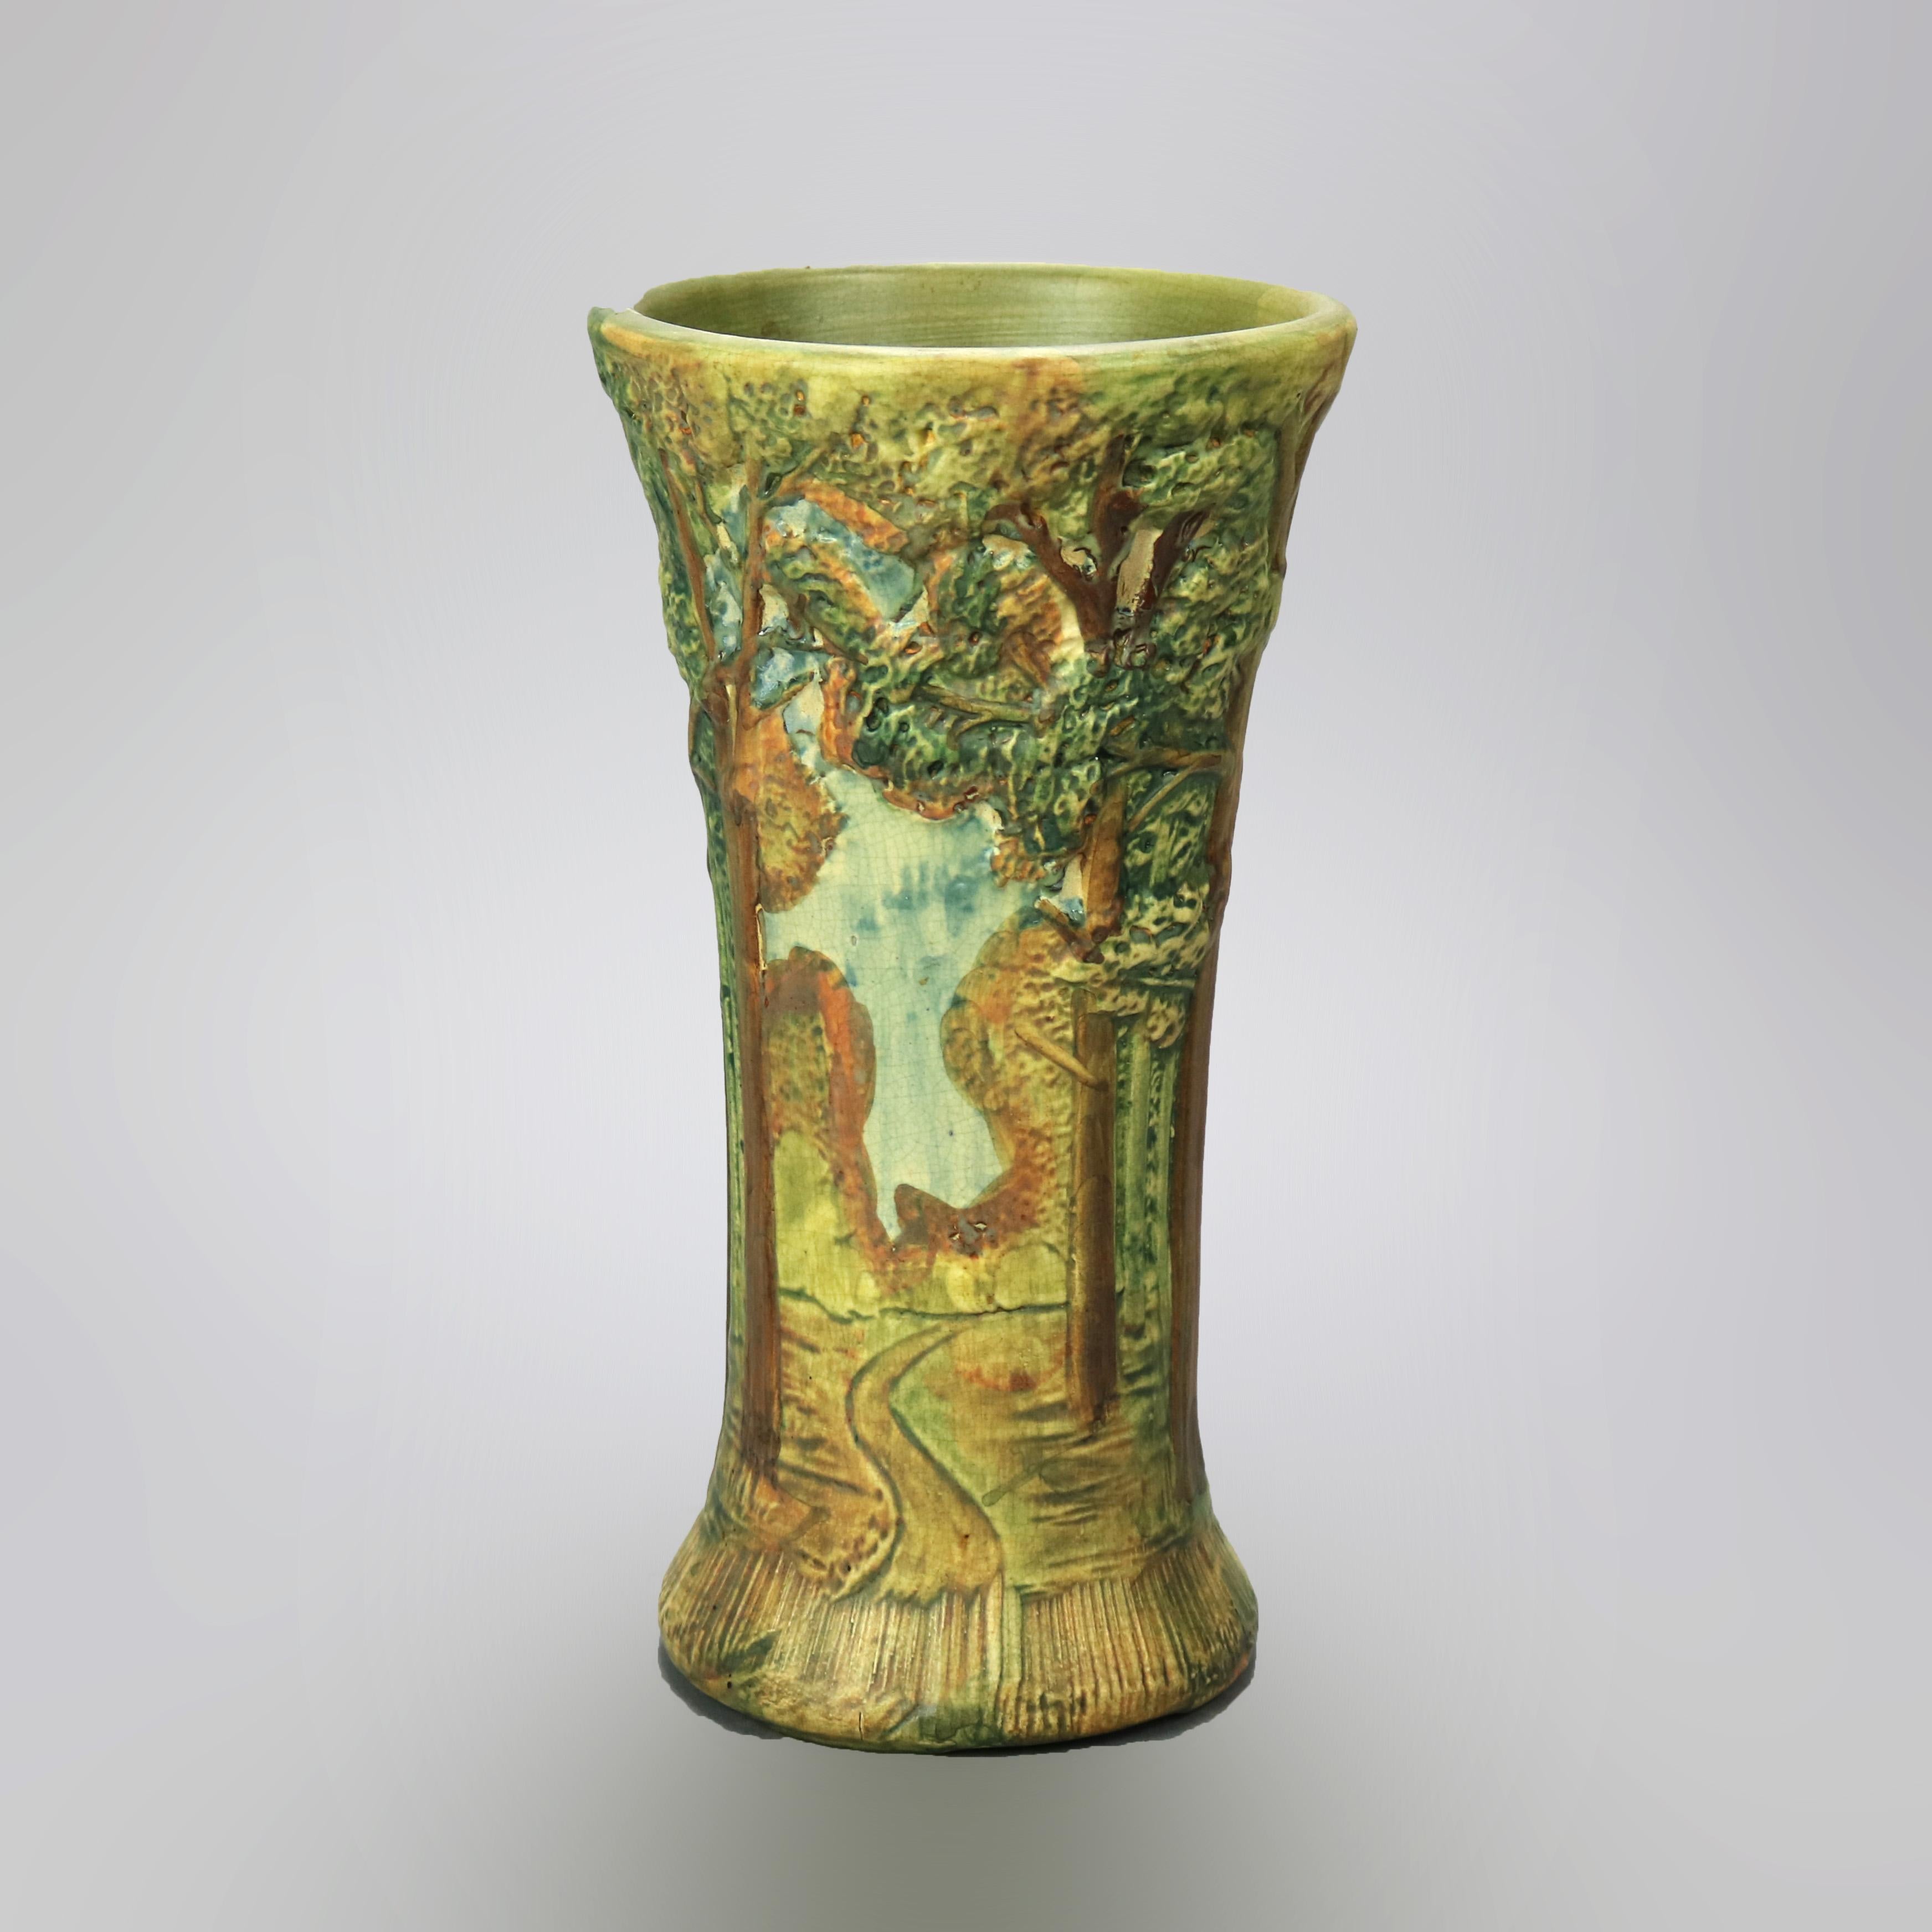 An antique vase by Weller in the Forest pattern offers art pottery construction in hourglass form with polychrome all-around landscape scene in relief, unsigned, circa 1930

Measures - 12''H x 6.25''W x 6.25''D.